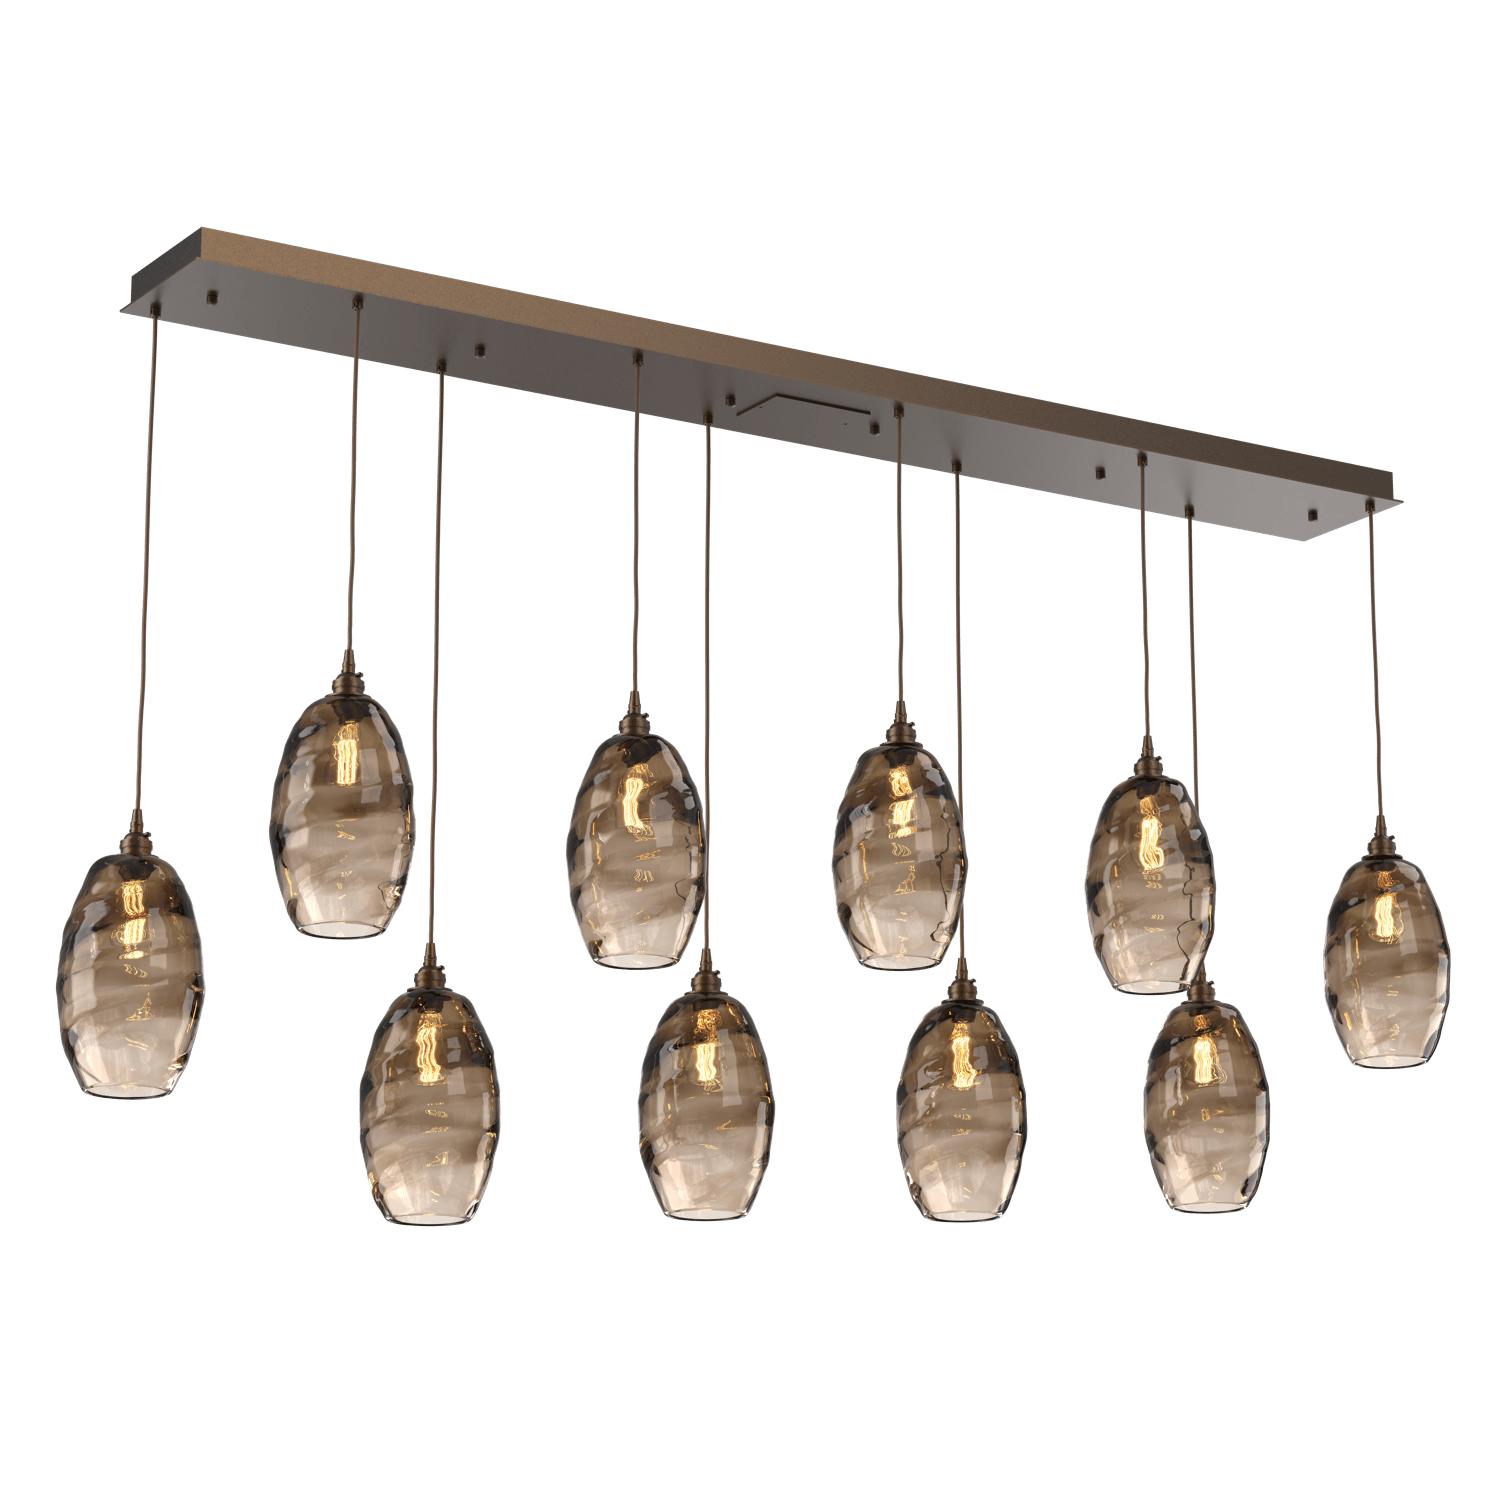 PLB0035-10-FB-OB-Hammerton-Studio-Optic-Blown-Glass-Elisse-10-light-linear-pendant-chandelier-with-flat-bronze-finish-and-optic-bronze-blown-glass-shades-and-incandescent-lamping